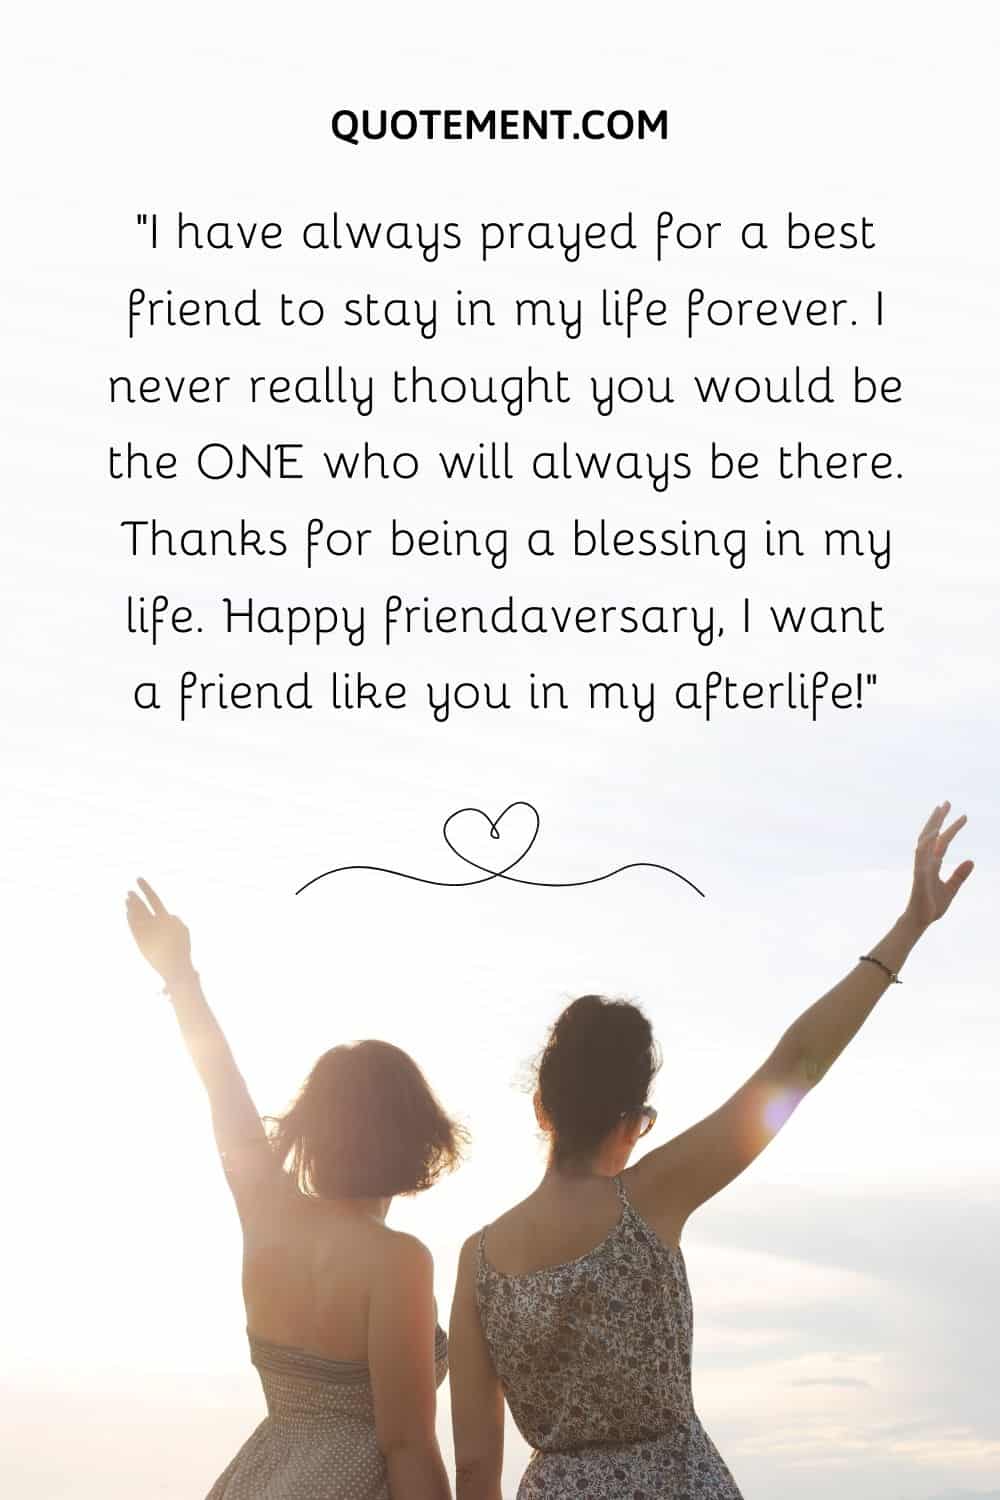 I have always prayed for a best friend to stay in my life forever.